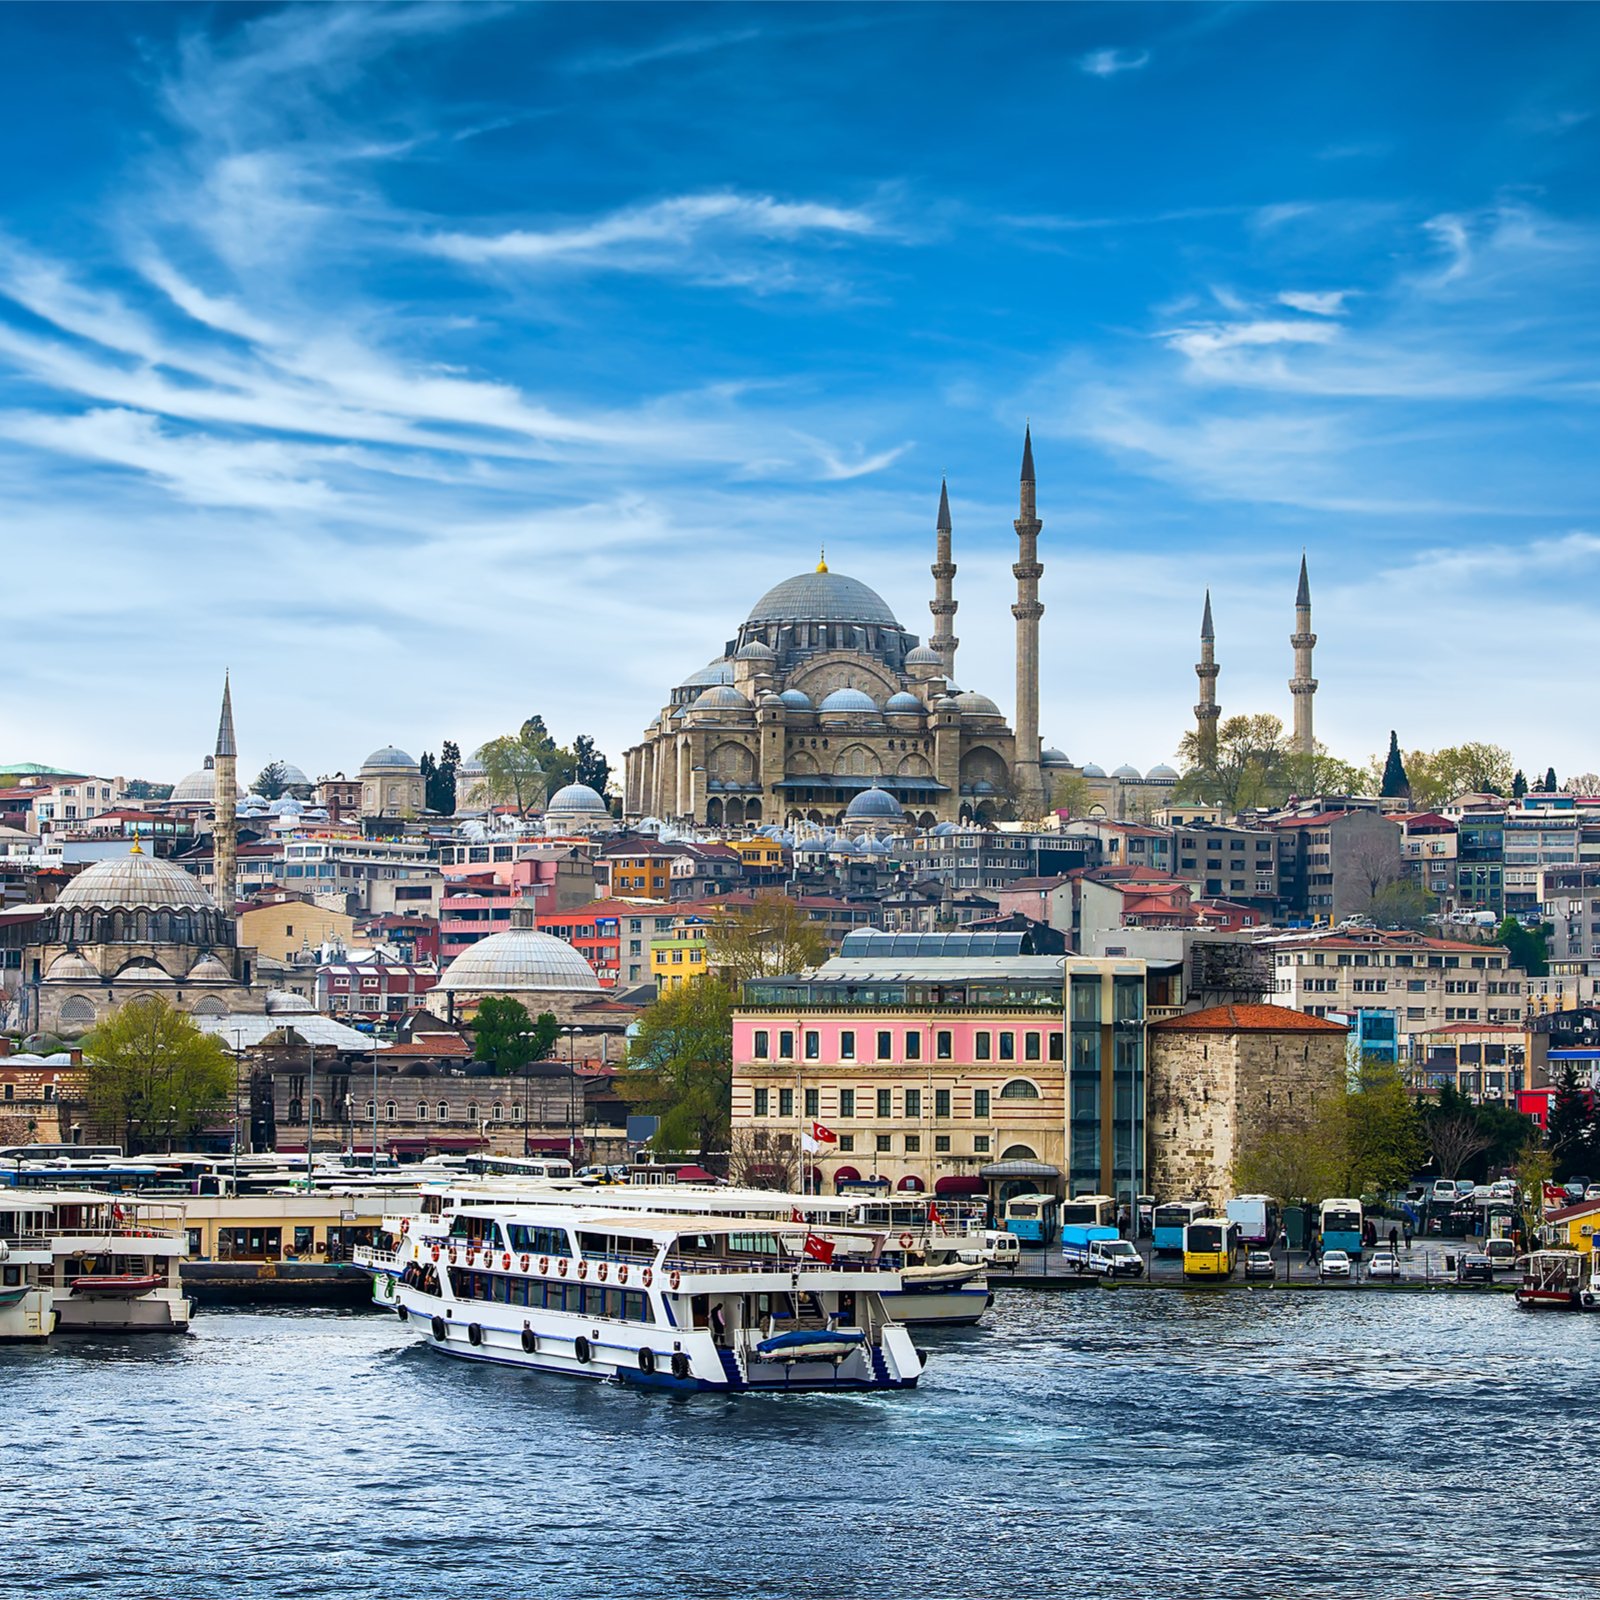 Bitcoin in Brief Monday: From New York to Historic Istanbul Market